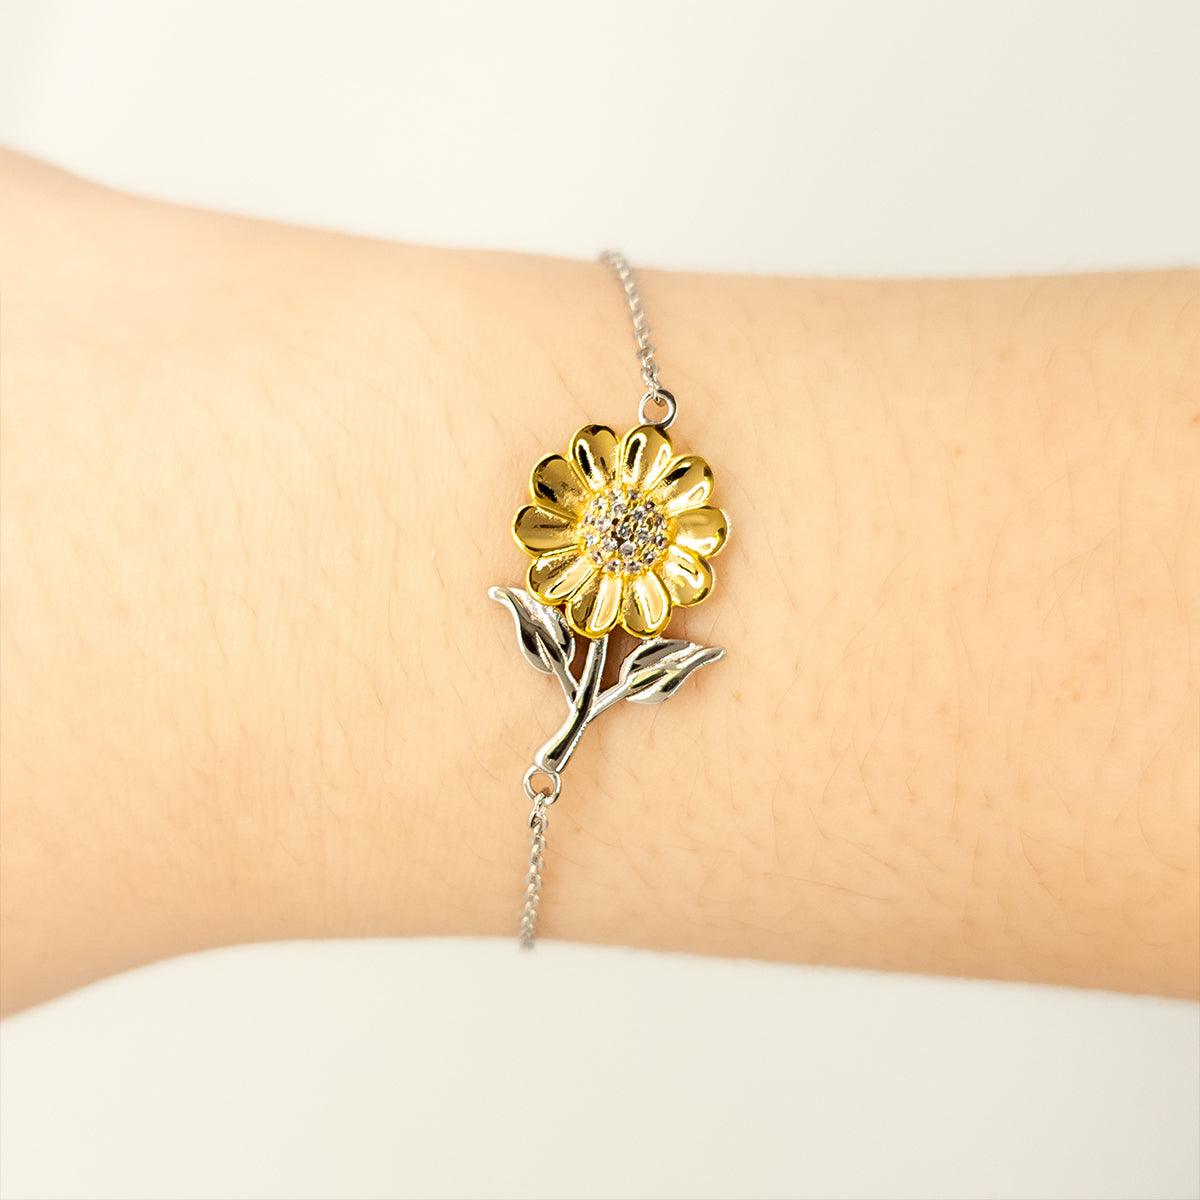 Remarkable Insurance Sales Agent Gifts, Your dedication and hard work, Inspirational Birthday Christmas Unique Sunflower Bracelet For Insurance Sales Agent, Coworkers, Men, Women, Friends - Mallard Moon Gift Shop